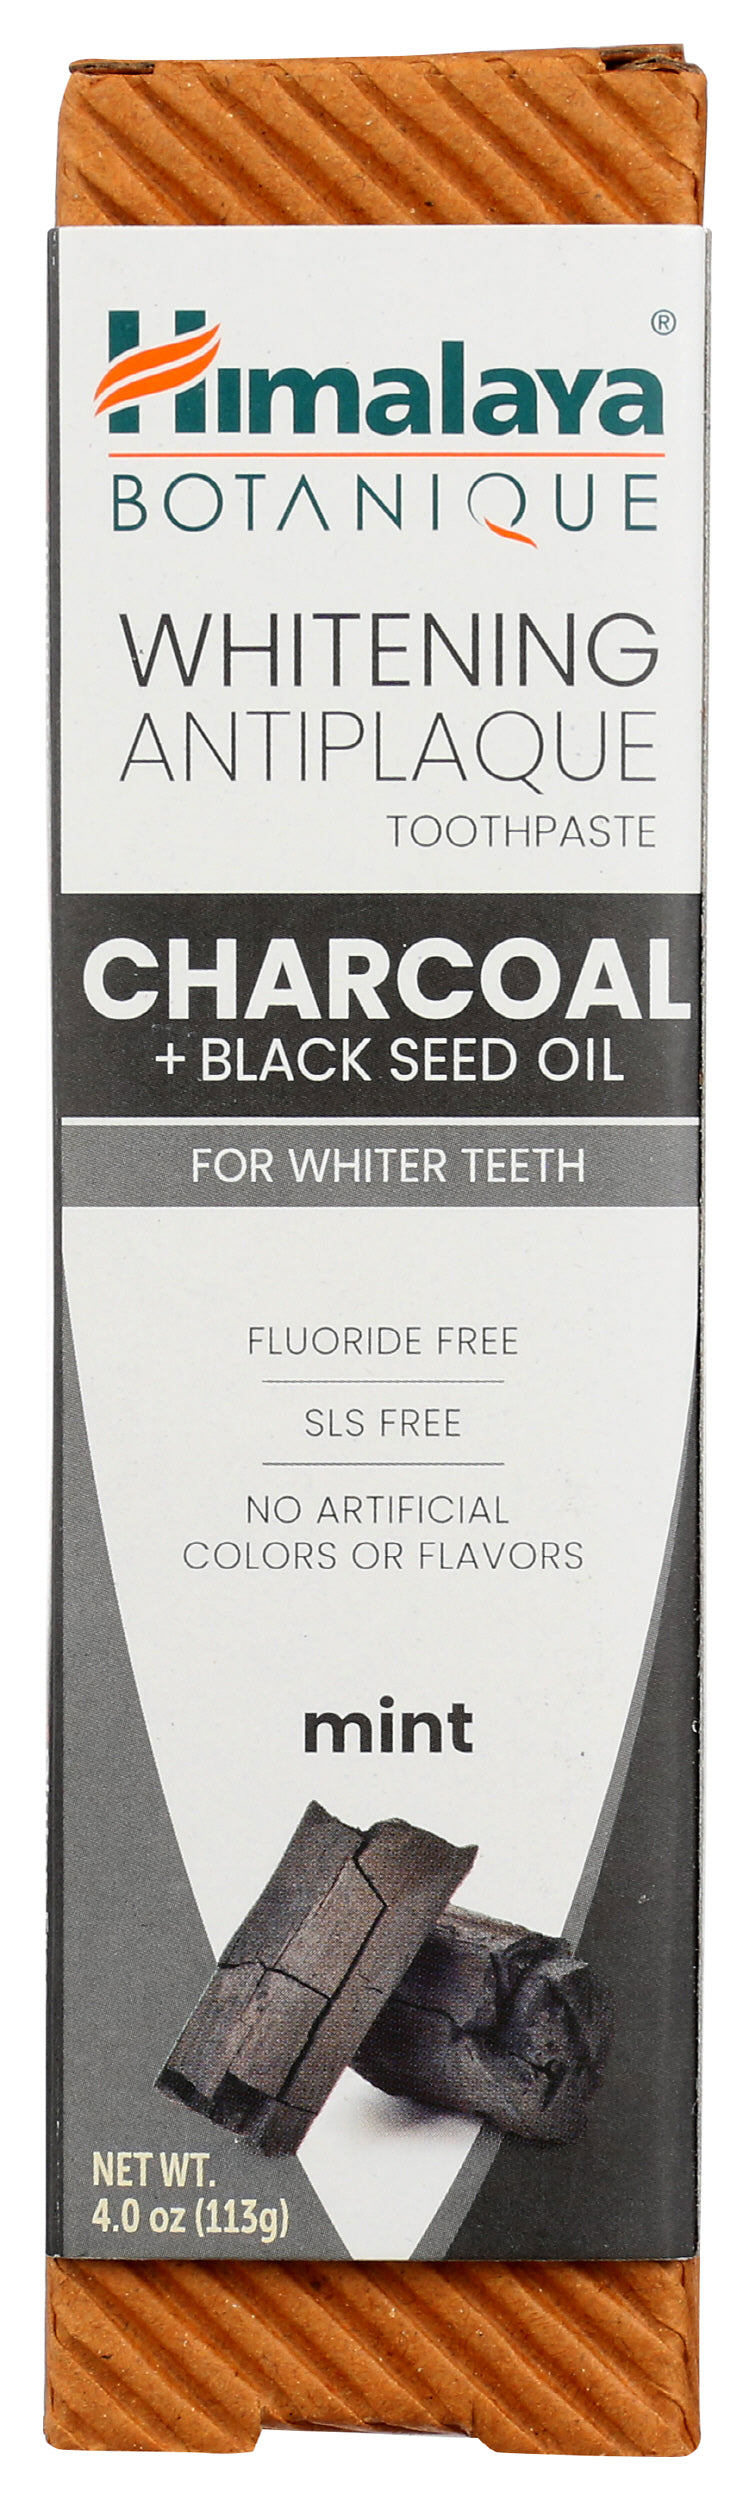 Himalaya Whitening Toothpaste Charcoal + Black Seed Oil 4.0 oz